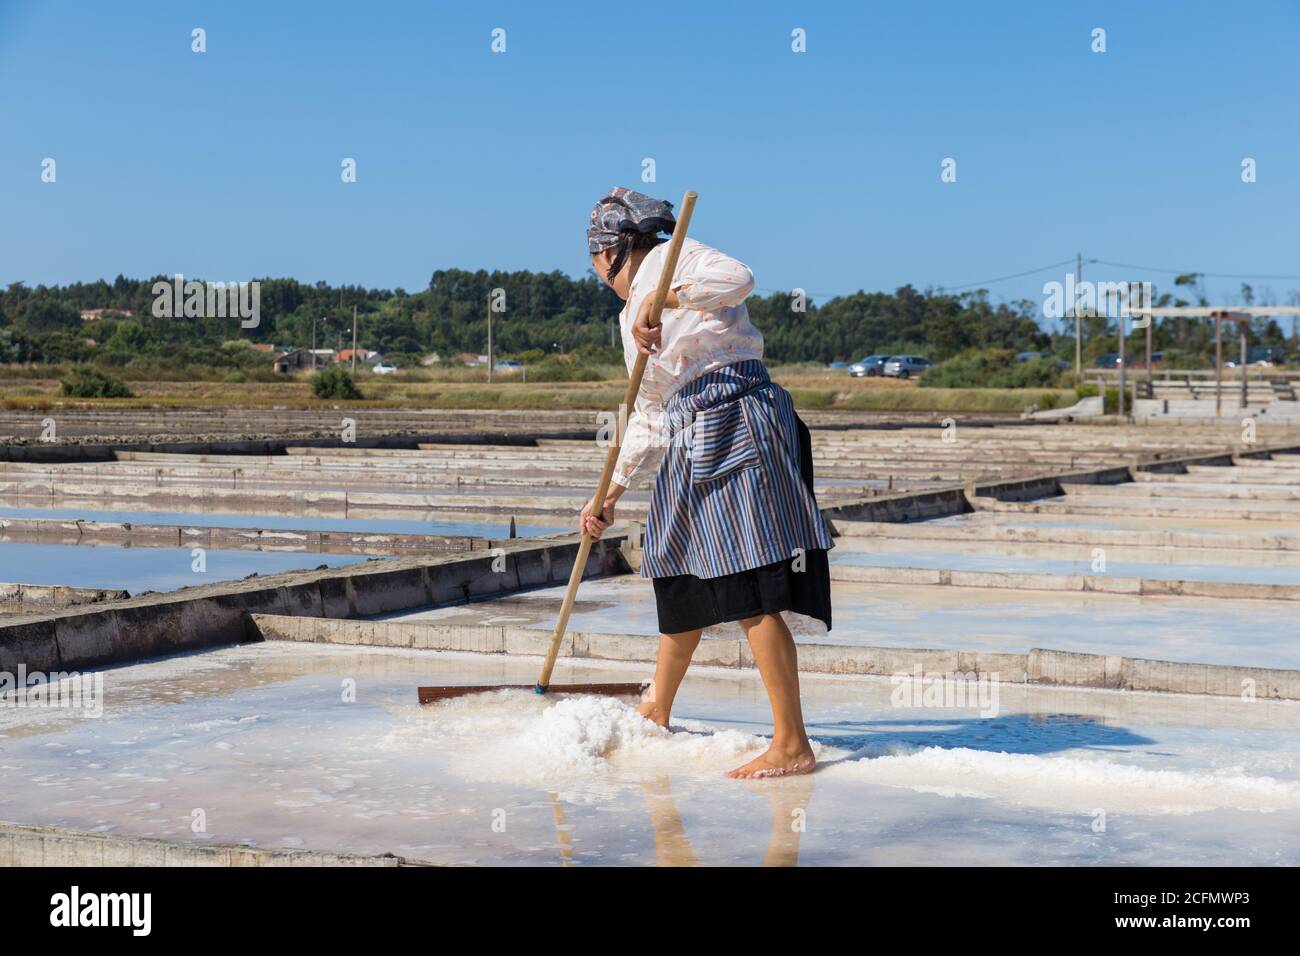 Woman working in traditional salt extraction in Figueira da Foz, Portugal Stock Photo